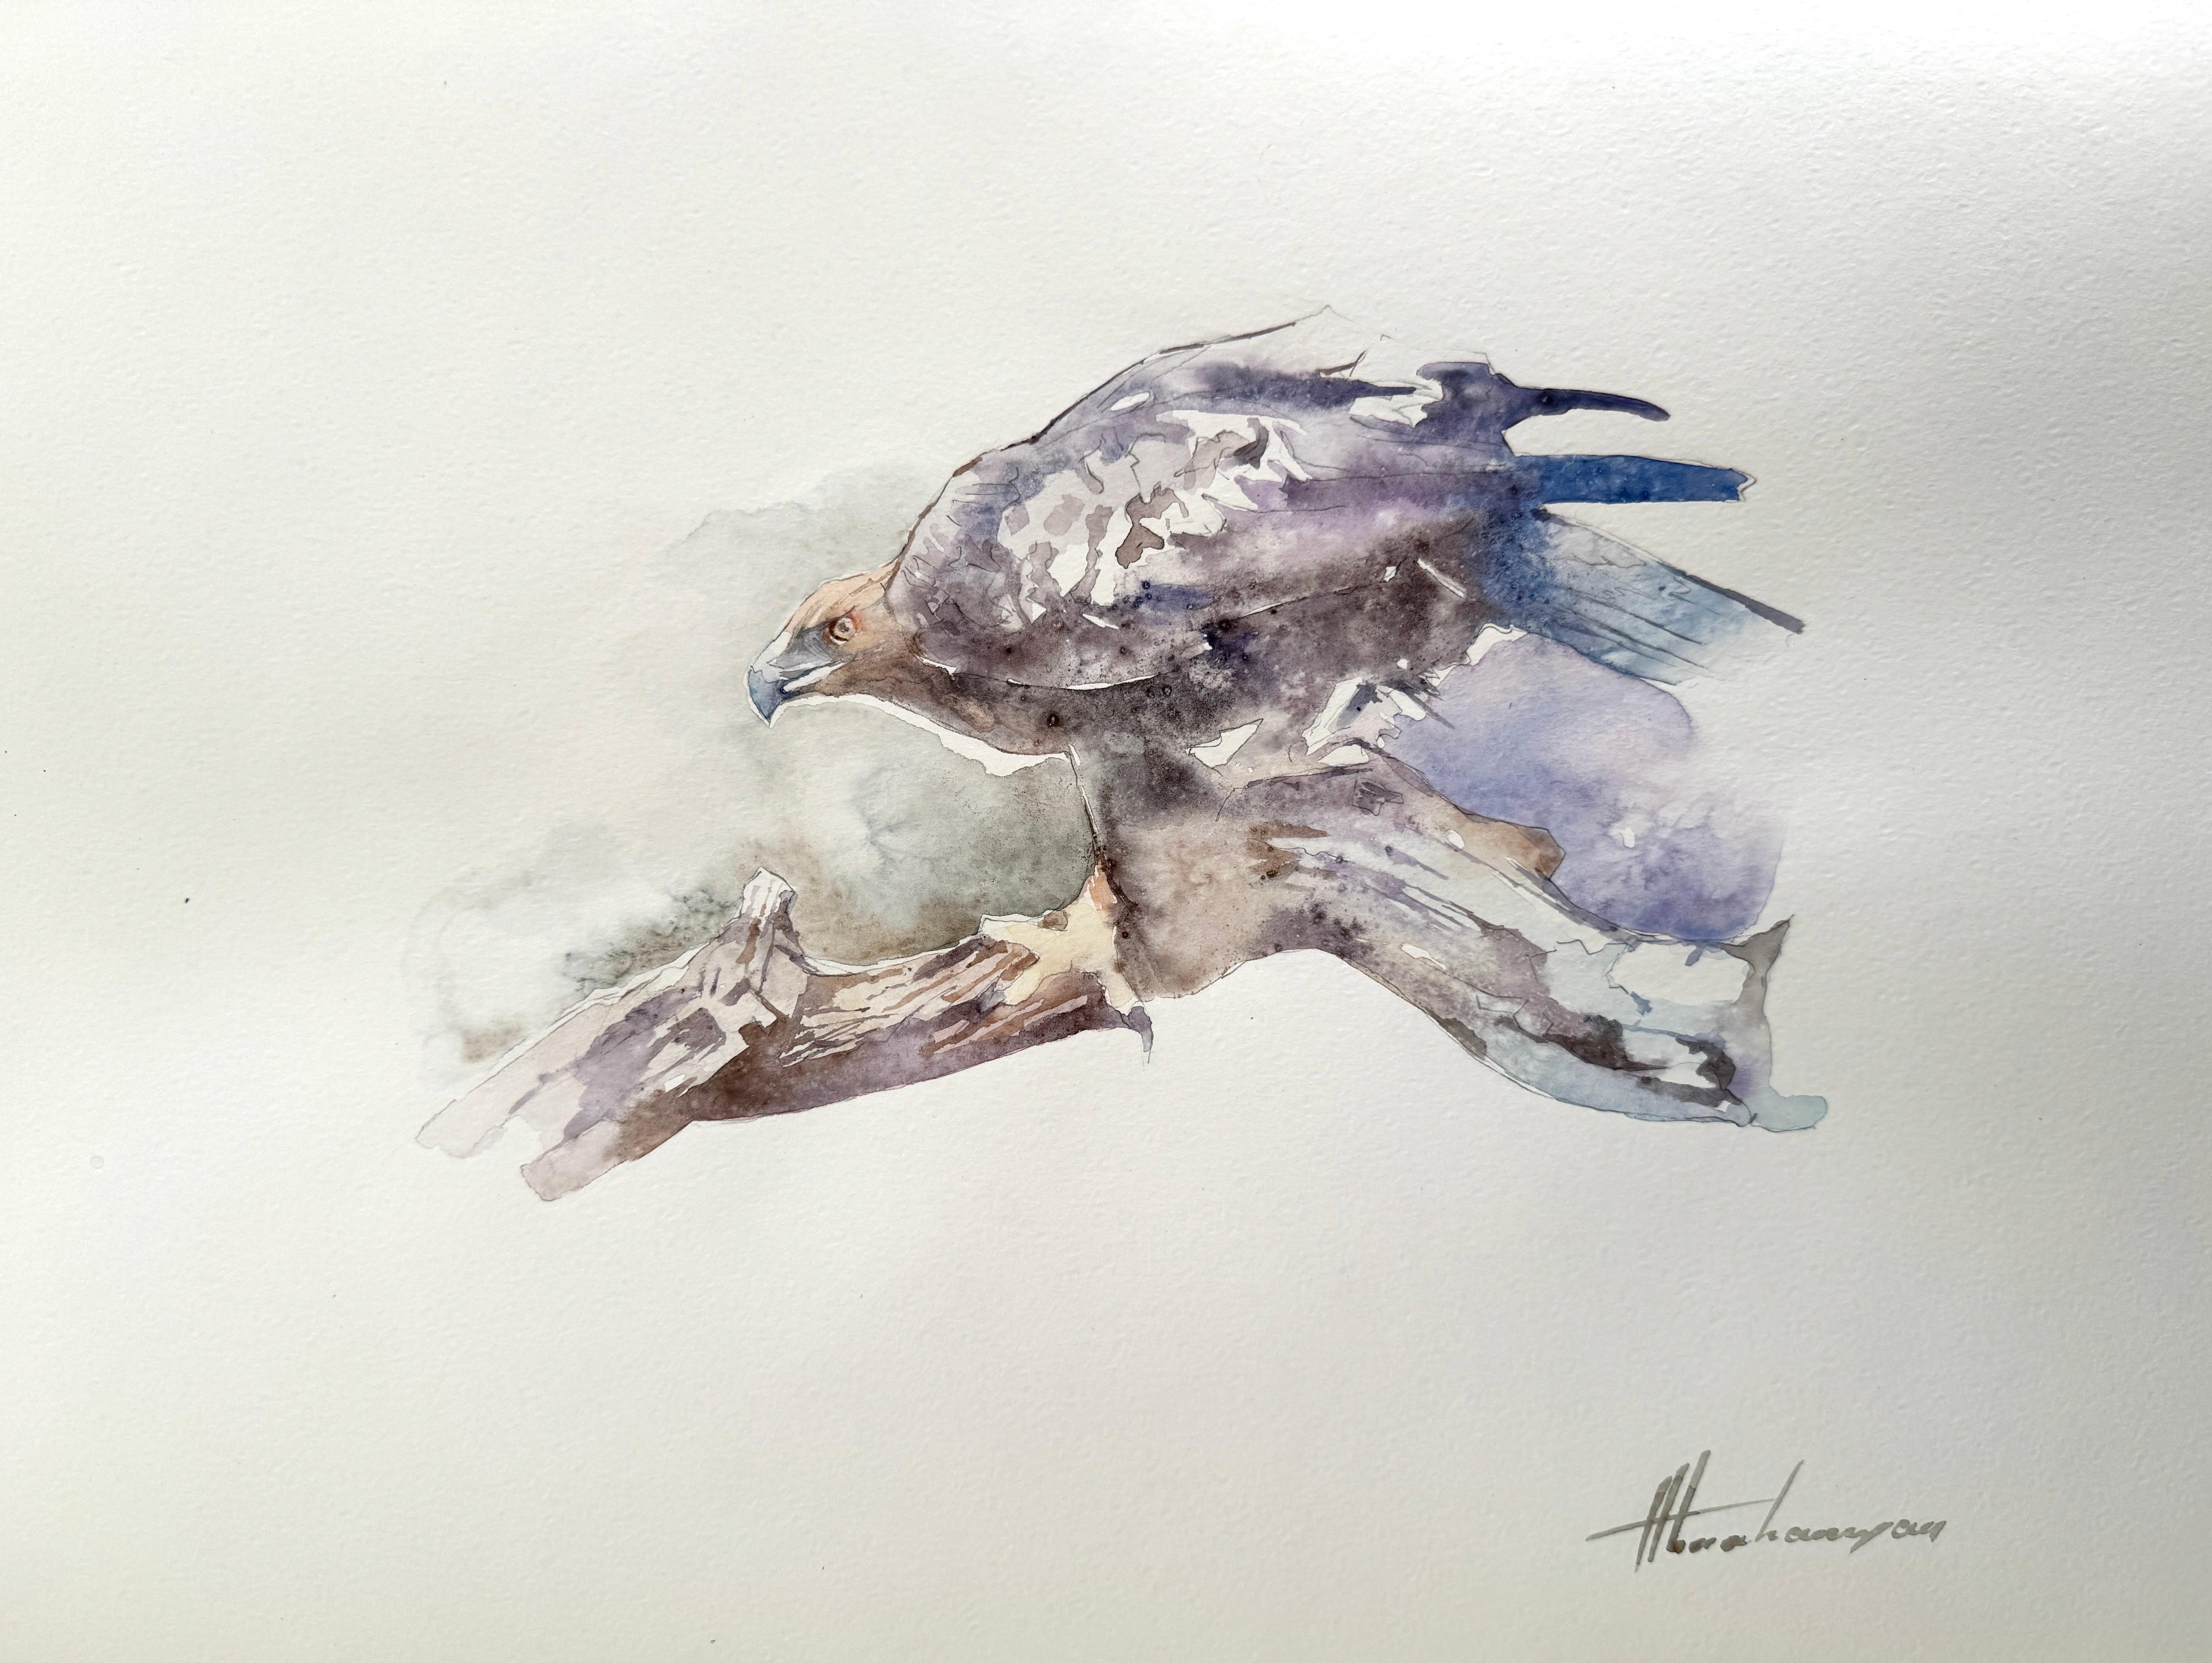 Artyom Abrahamyan Animal Art - Eagle, Watercolor Handmade Painting, One of a Kind